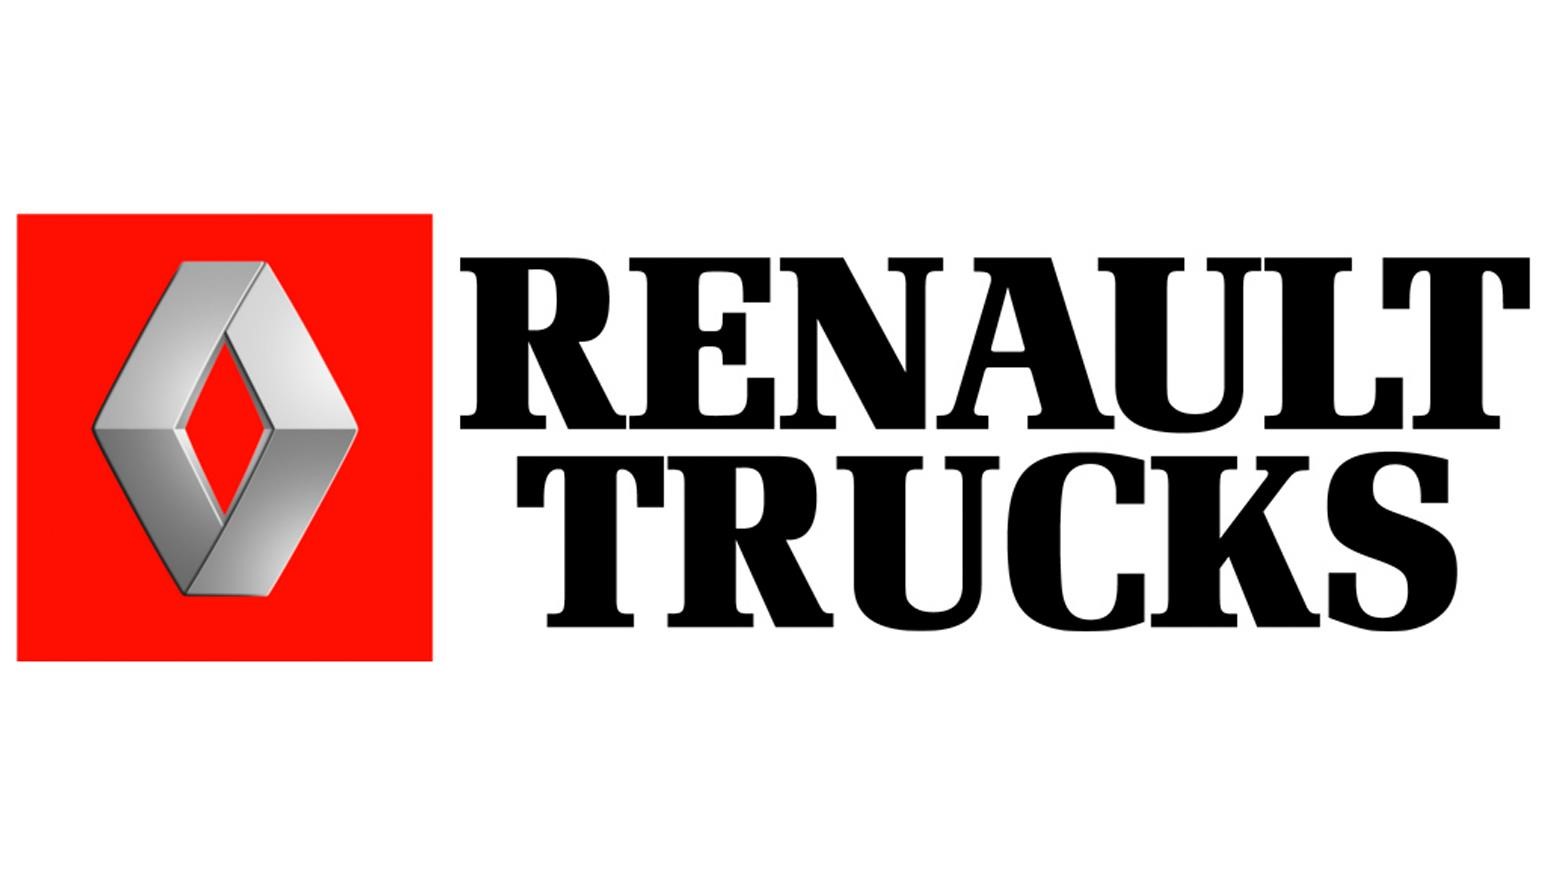 Renault Trucks Records A 10% Increase In Invoiced Vehicles In 2018